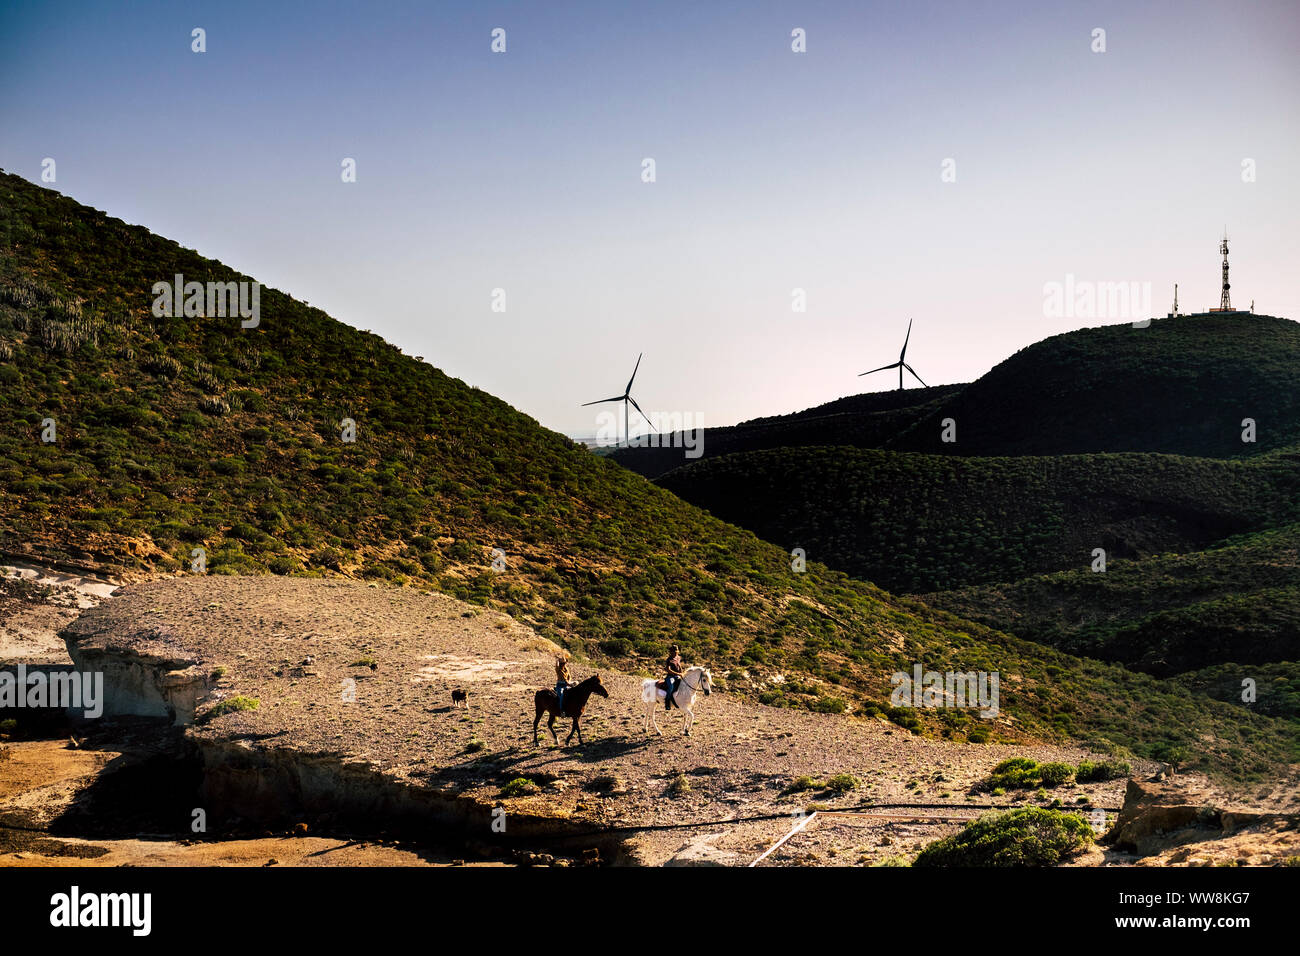 couple of rider with horses in adventure leisure travel activity in the valley with mountains and wind mills for energy production on background. freedom spirit and alternative lifestyle concept Stock Photo